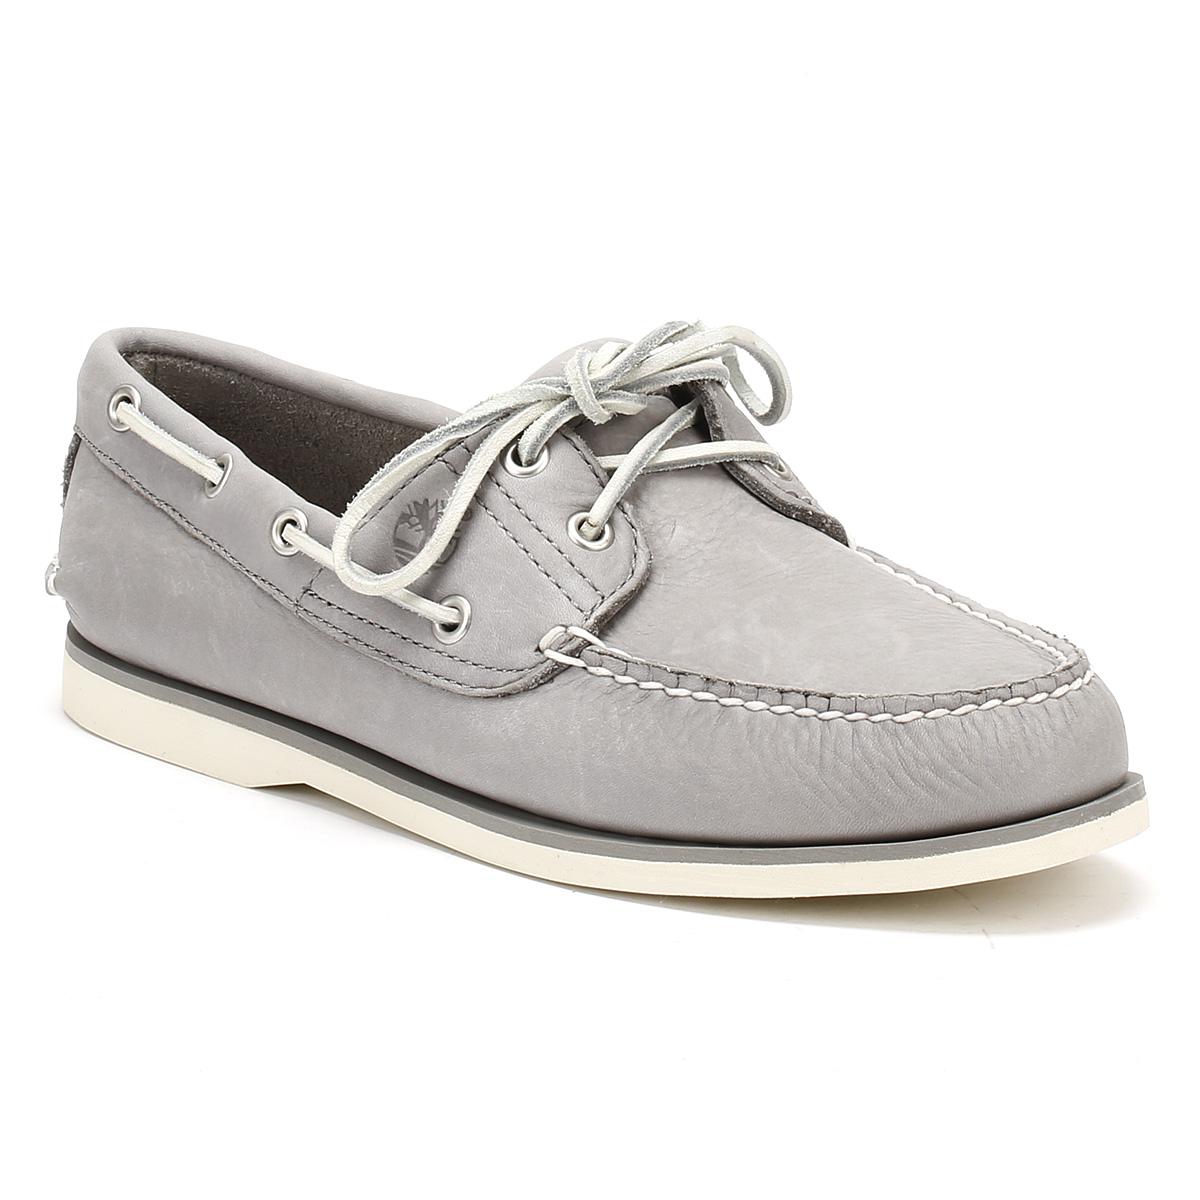 grey leather boat shoes